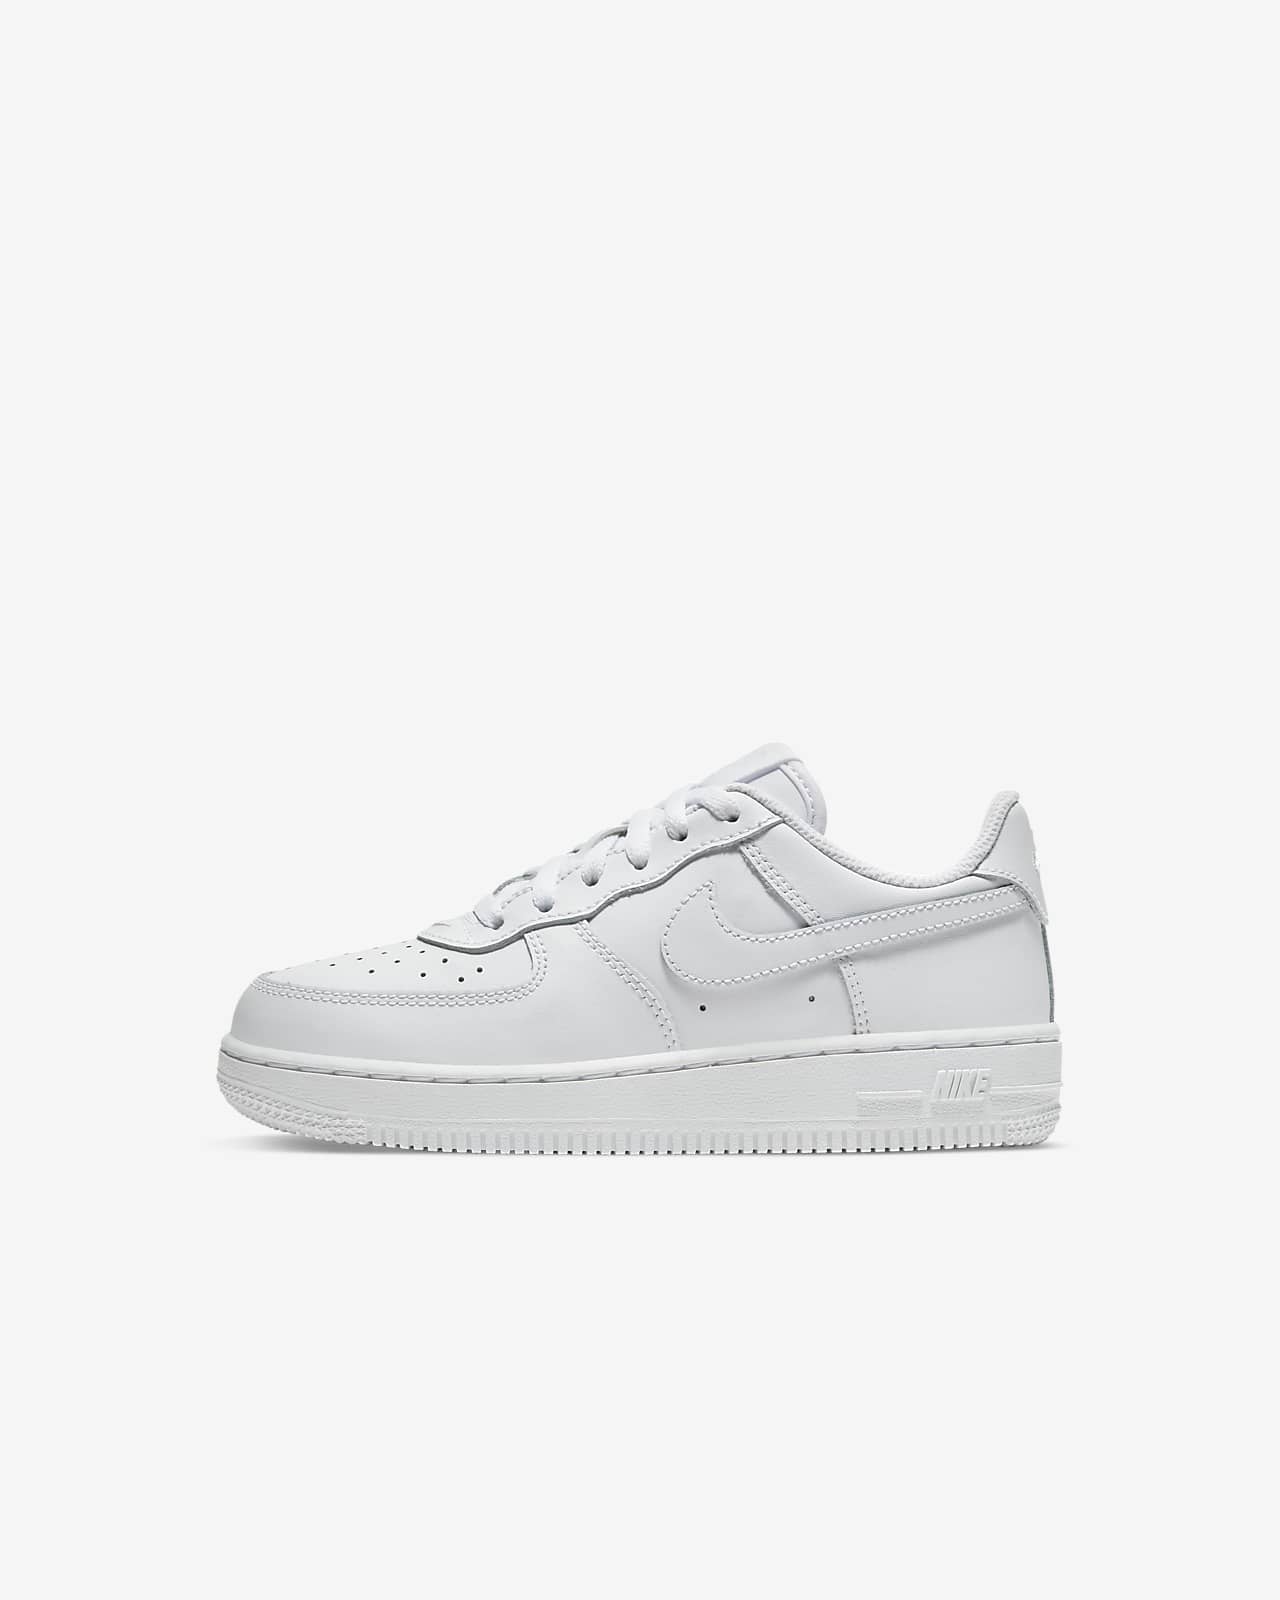 air force 1 girl shoes size 4